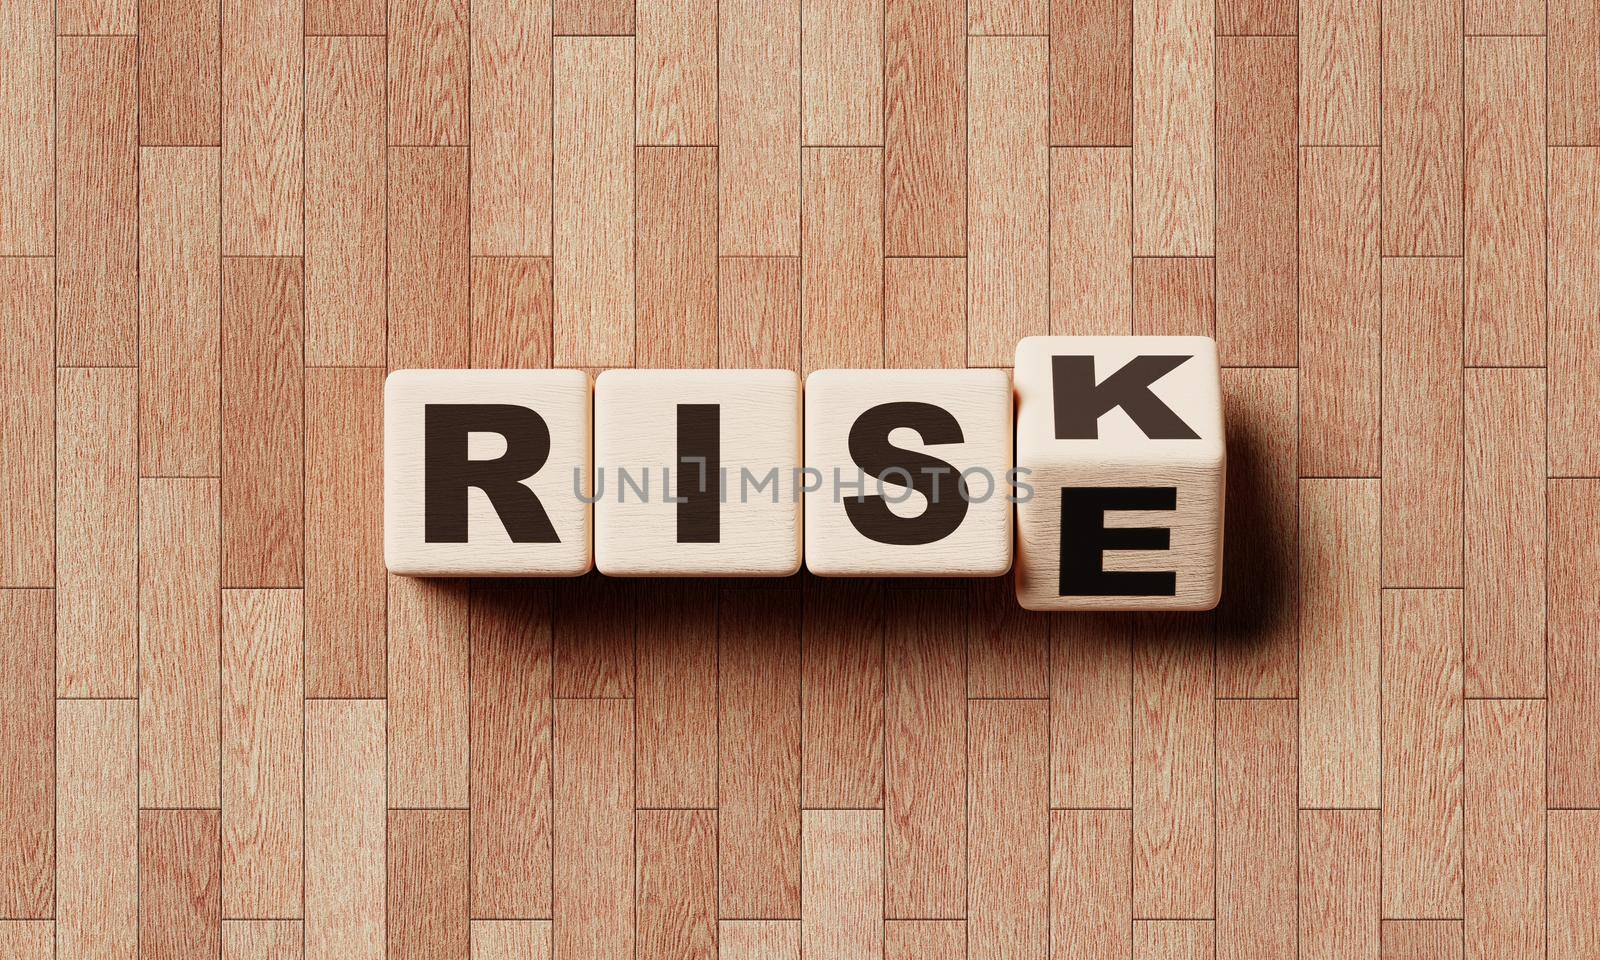 Risk and rise wooden block cube on laminate floor. Financial risk management and business economy growth performance concept. Planning strategies and achieving goals theme. 3D illustration rendering by MiniStocker